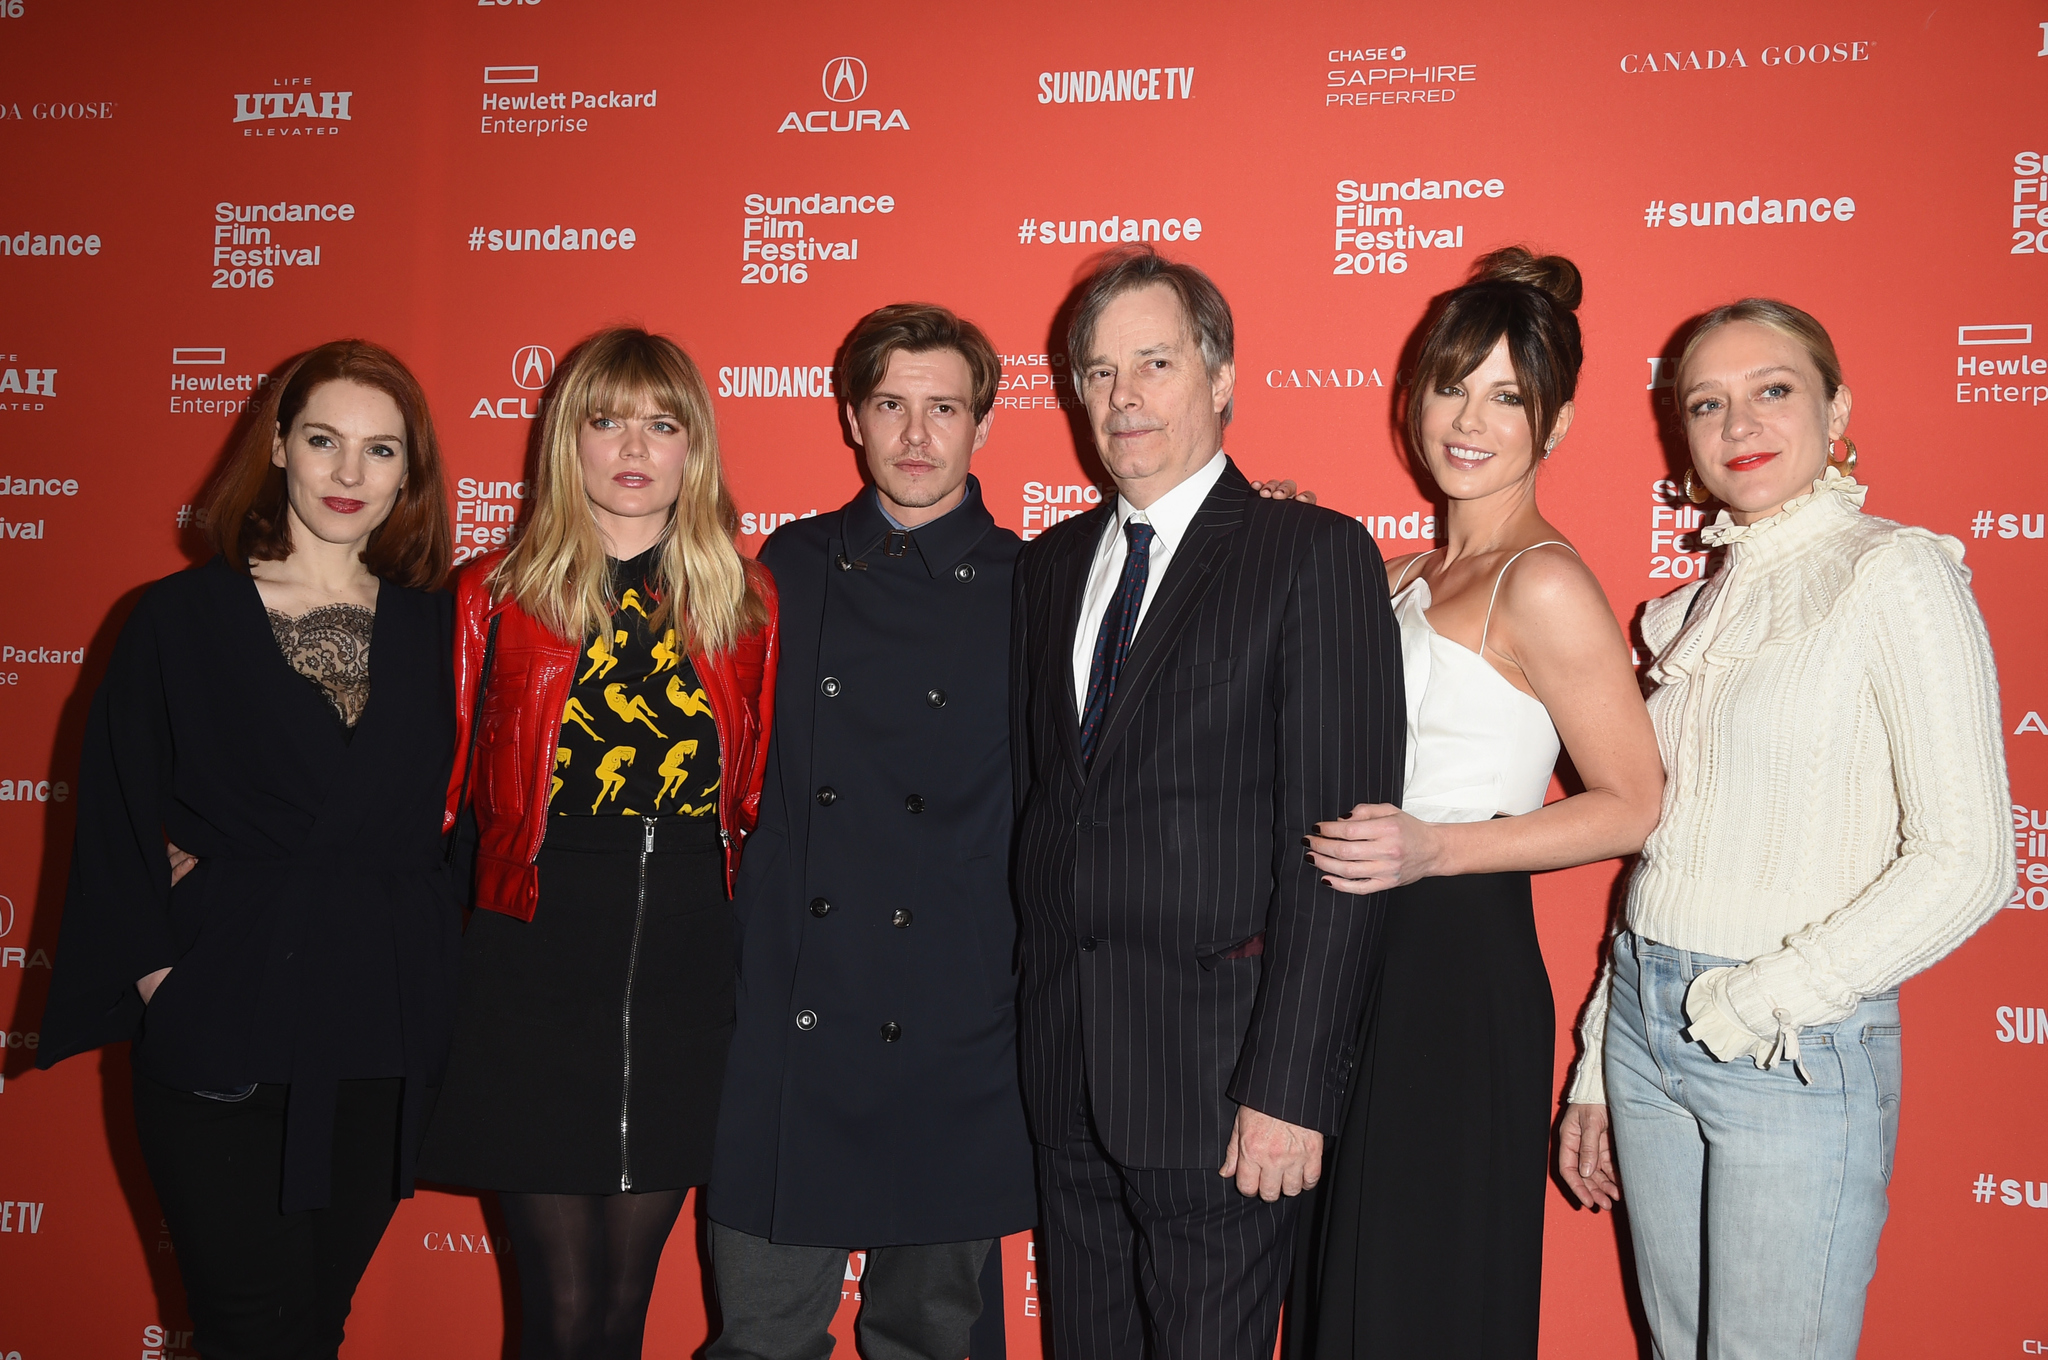 Kate Beckinsale, Chloë Sevigny, Whit Stillman, Kelly Campbell, Xavier Samuel and Emma Greenwell at event of Love & Friendship (2016)